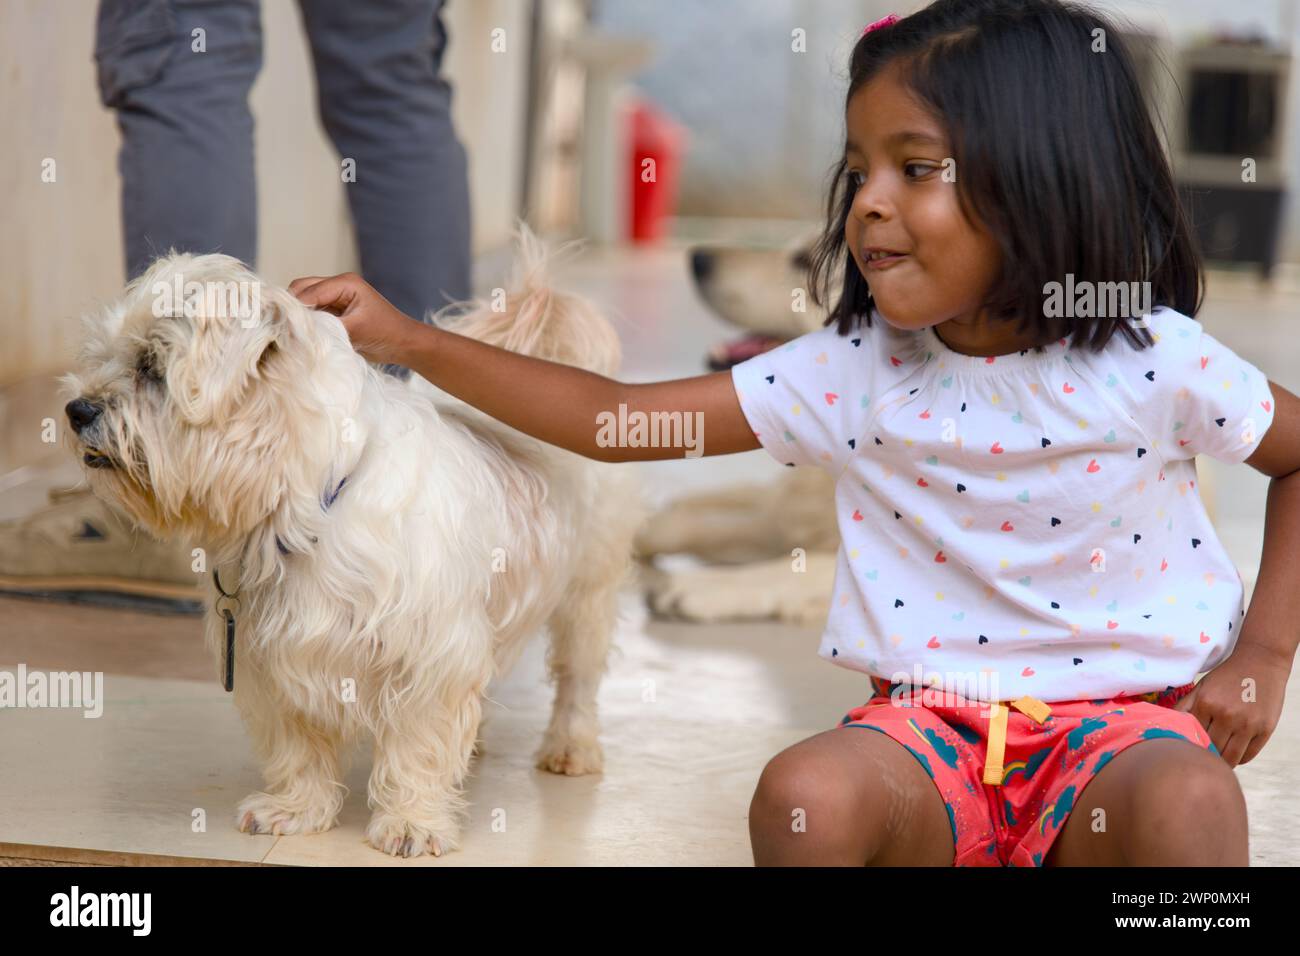 A young girl, filled with delight, engages in playful interaction with her fluffy white Maltese dog Stock Photo